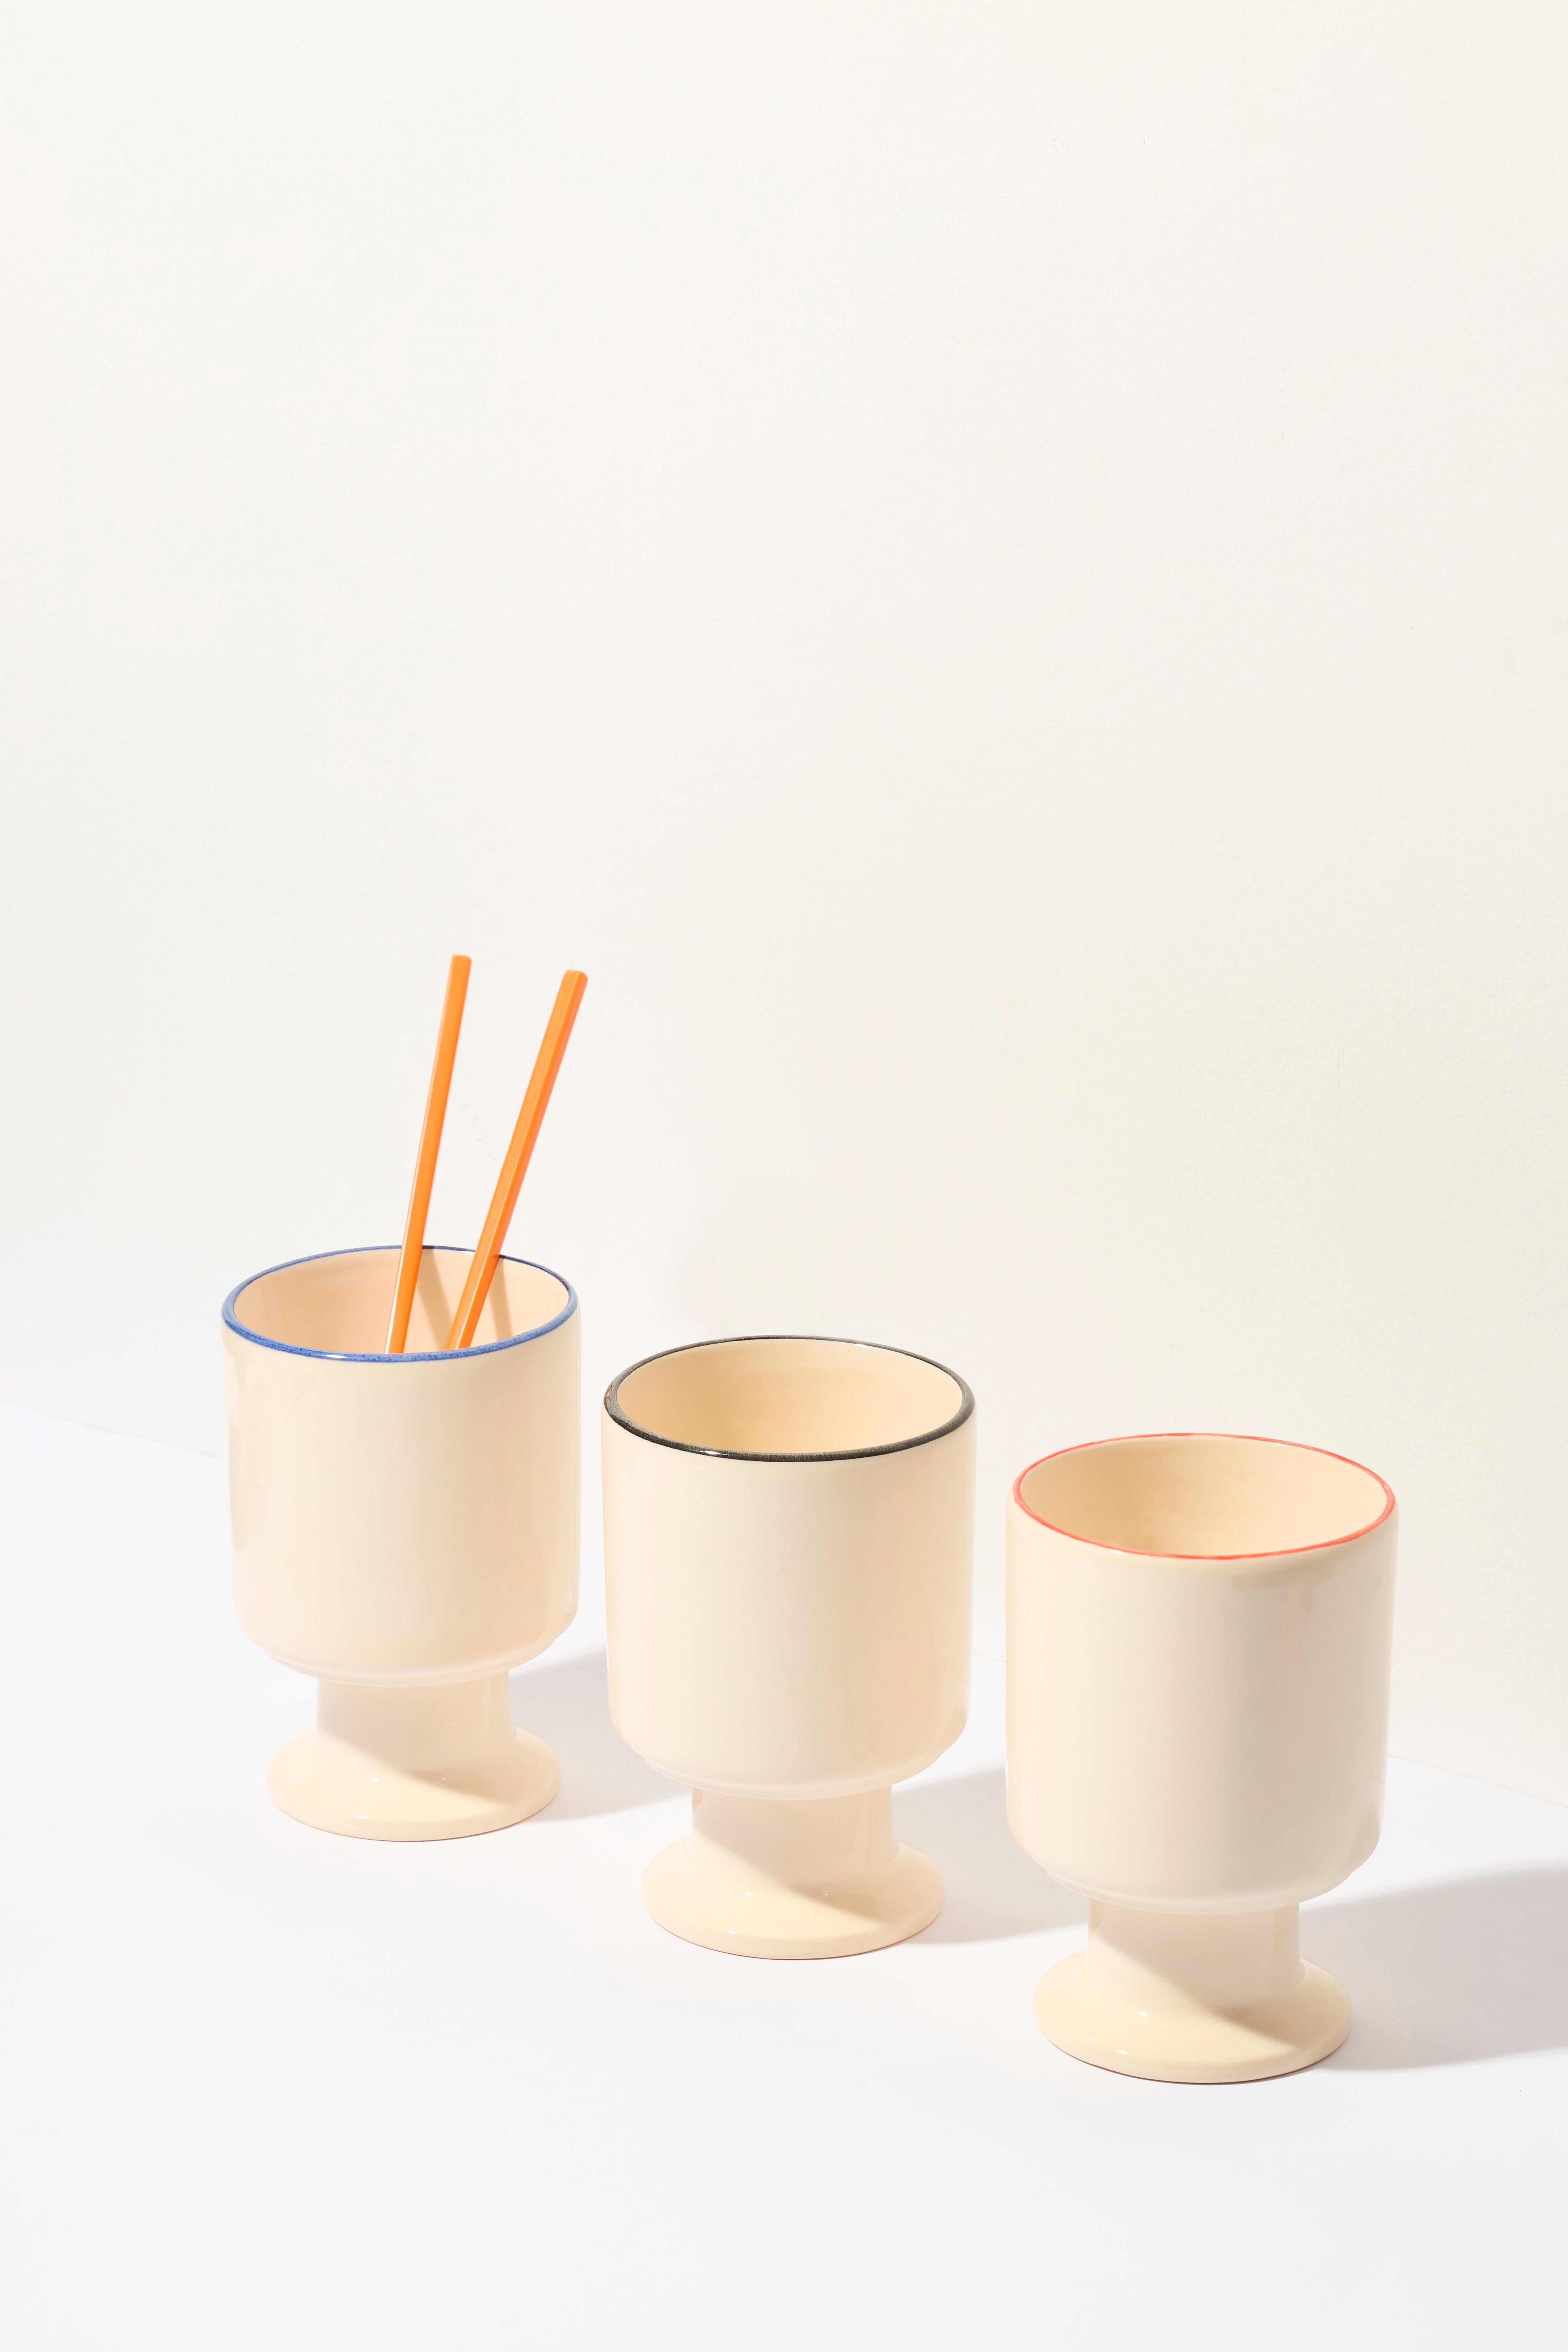 The WIT cup is a multifunctional vessel with a playful stem. It can become your favorite coffee cup, a dessert bowl, a container for pens, or other favorite accessories. WIT chalices can be stacked to create stable towers, making storage easy.

Dia.